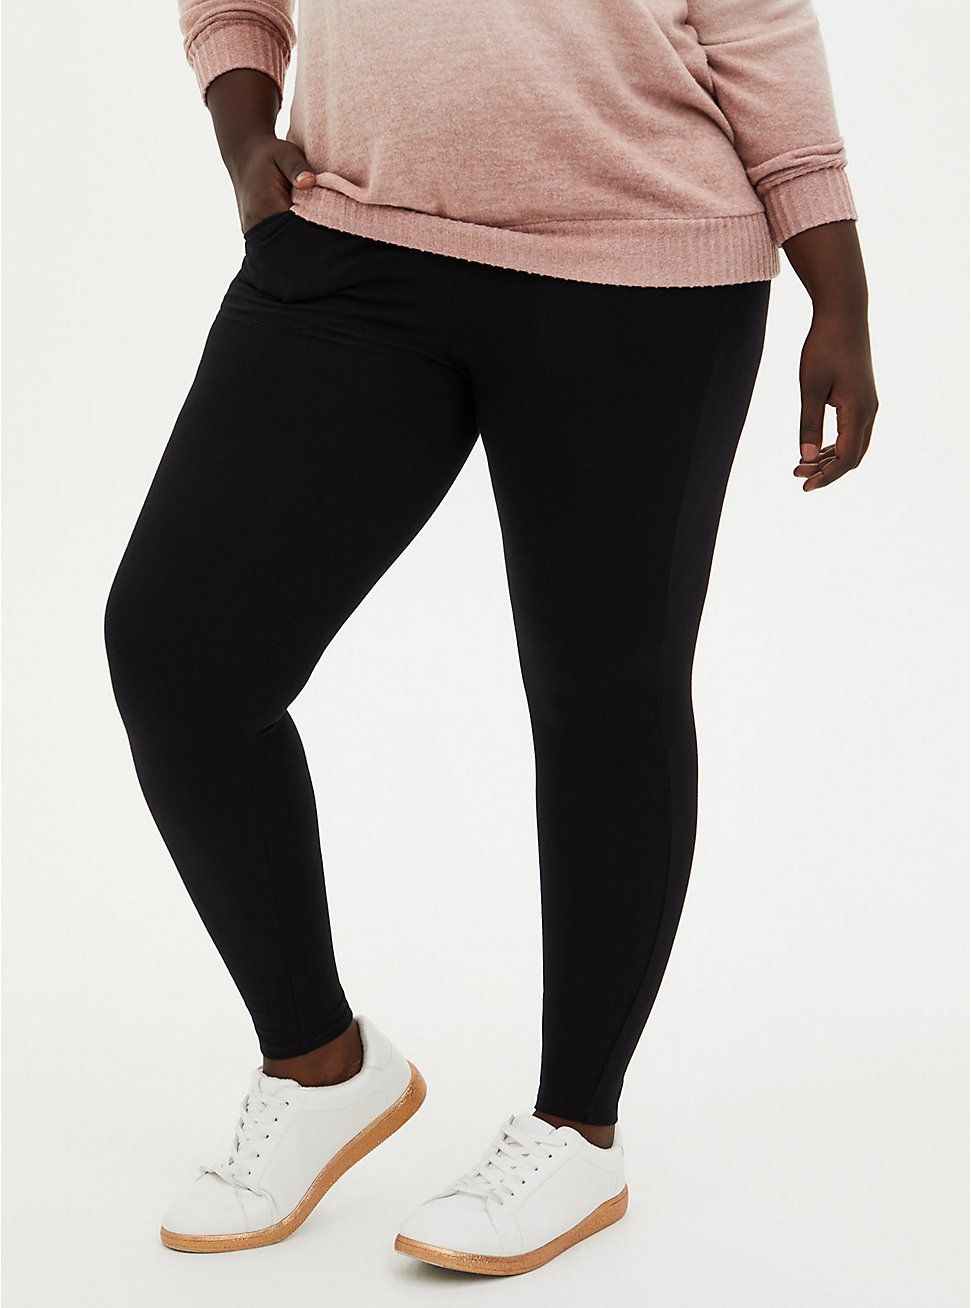 The Lululemon leggings dupe that have the 'squat test' approval - Netmums  Reviews